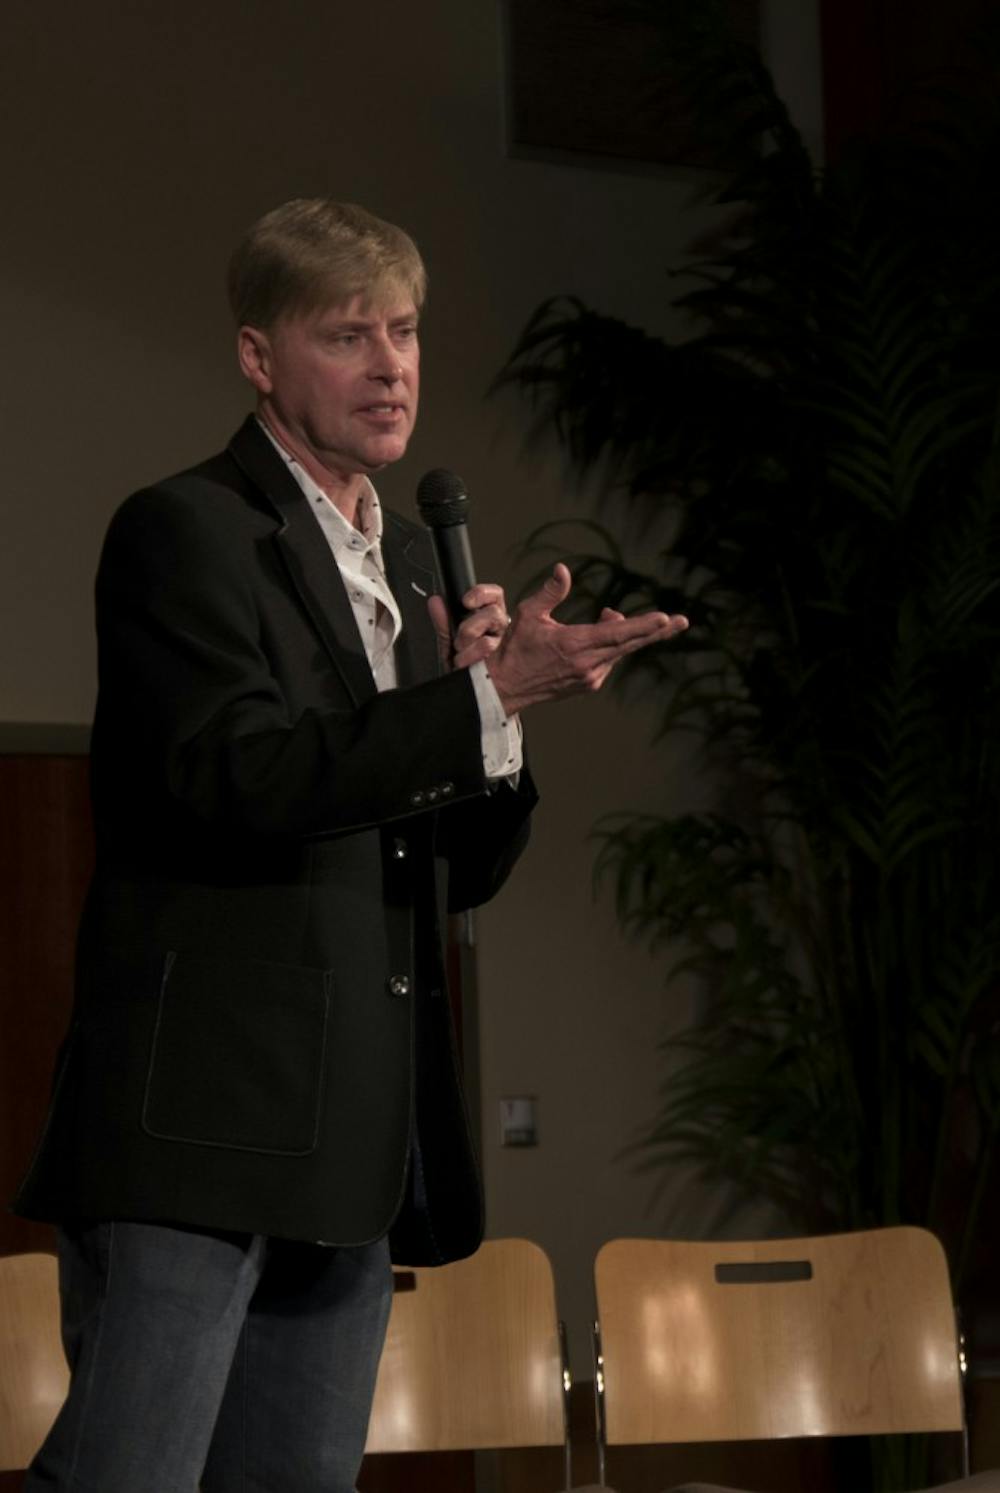 Frederick Winters performed a hypnosis show on Jan. 14 at the L. A. Pittenger Student Center. DN PHOTO TERENCE LIGHTNING